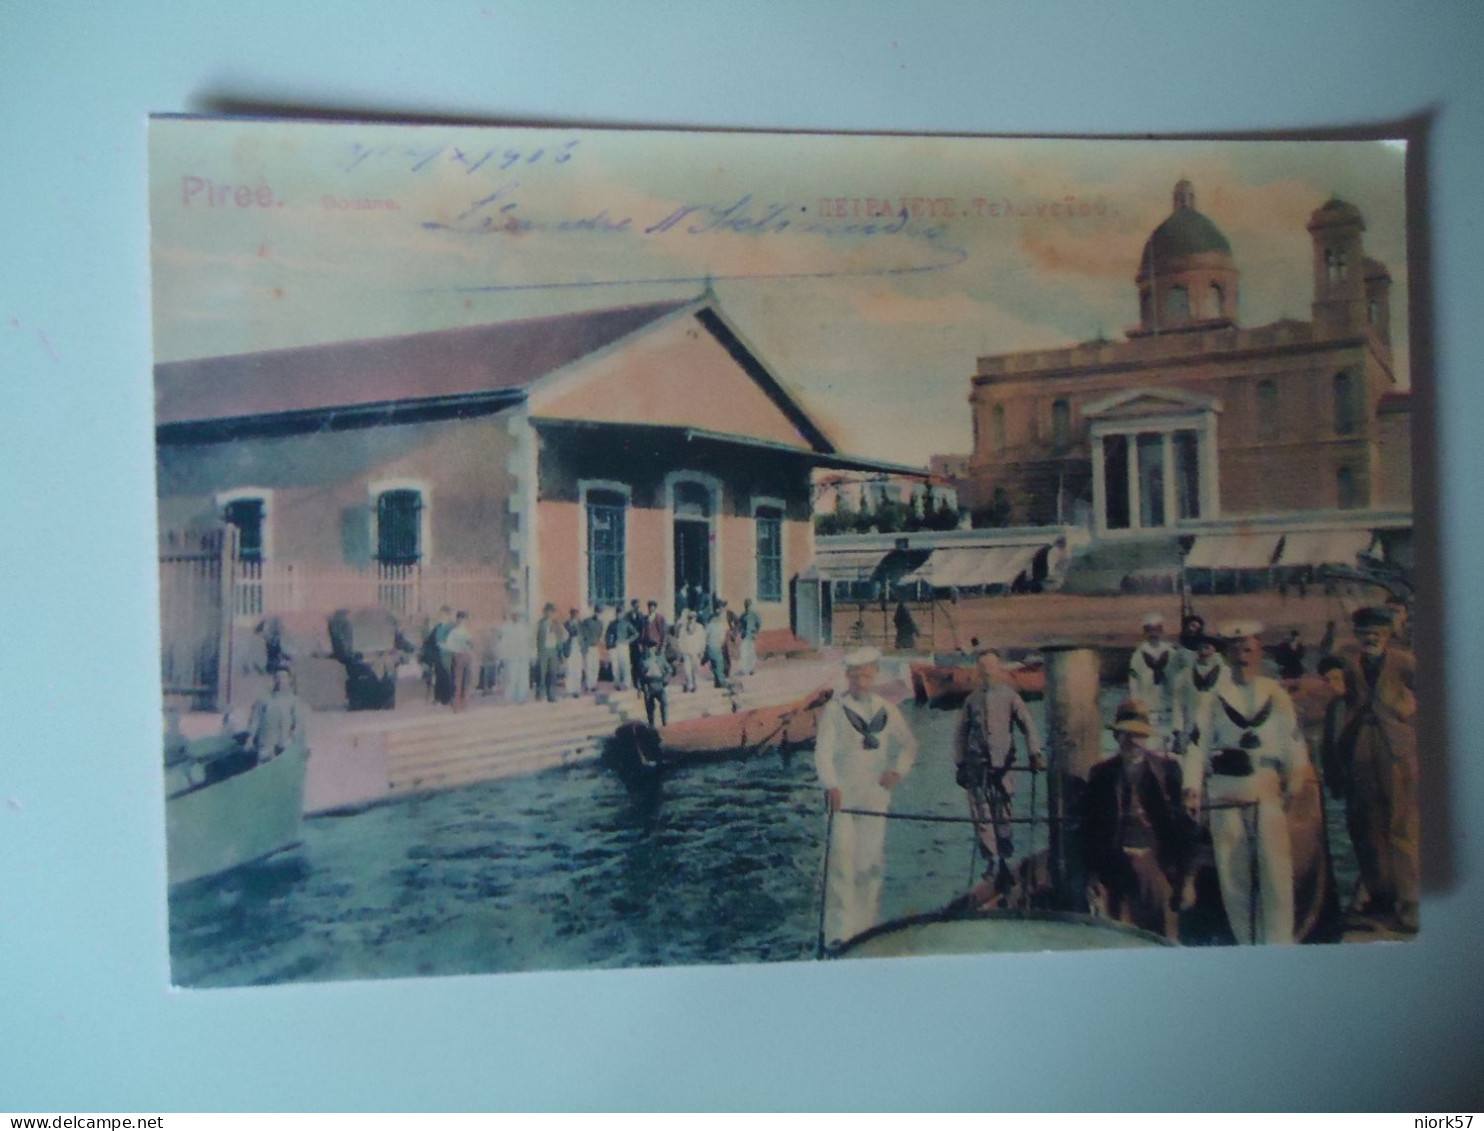 GREECE  POSTCARDS  1906 ΠΕΙΡΑΙΕΥΣ  ΙΣΩΣ  ΑΝΑΤΥΠΩΣΗ   FOR MORE PURCHASES 10% DISCOUNT - Griechenland